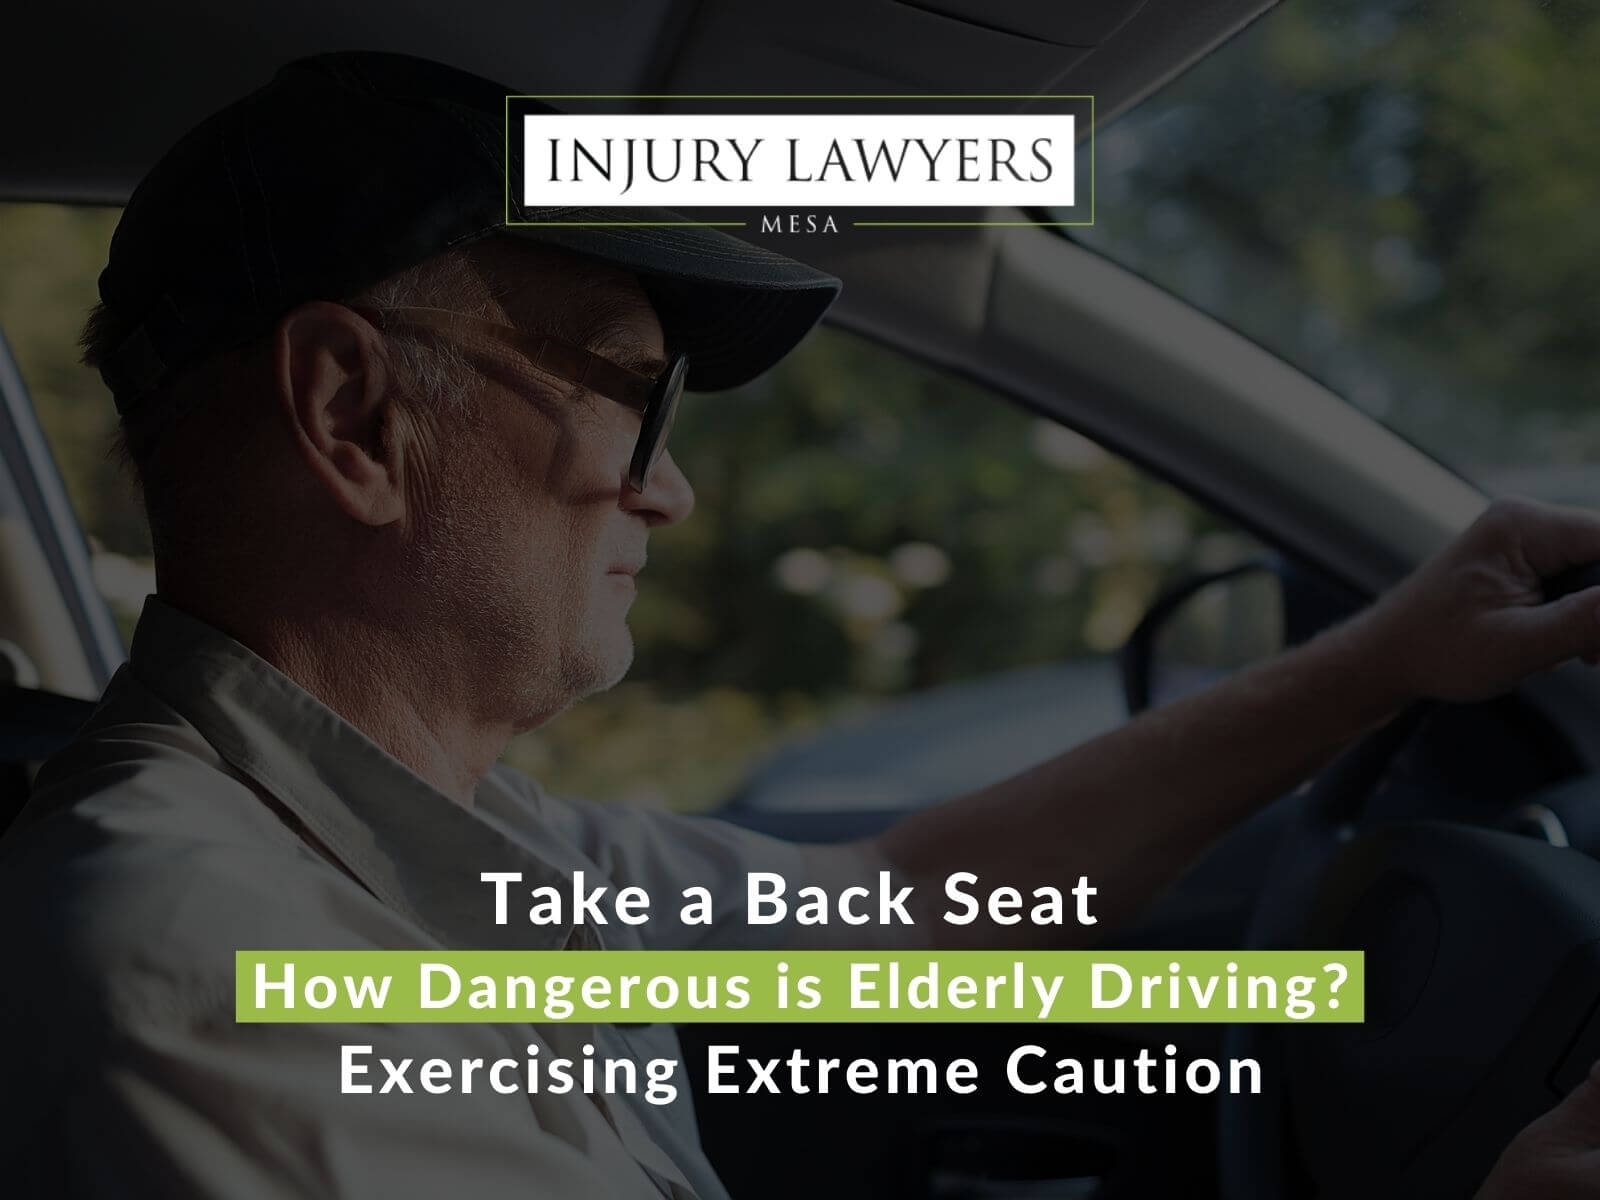 Take a Back Seat: How Dangerous is Elderly Driving?